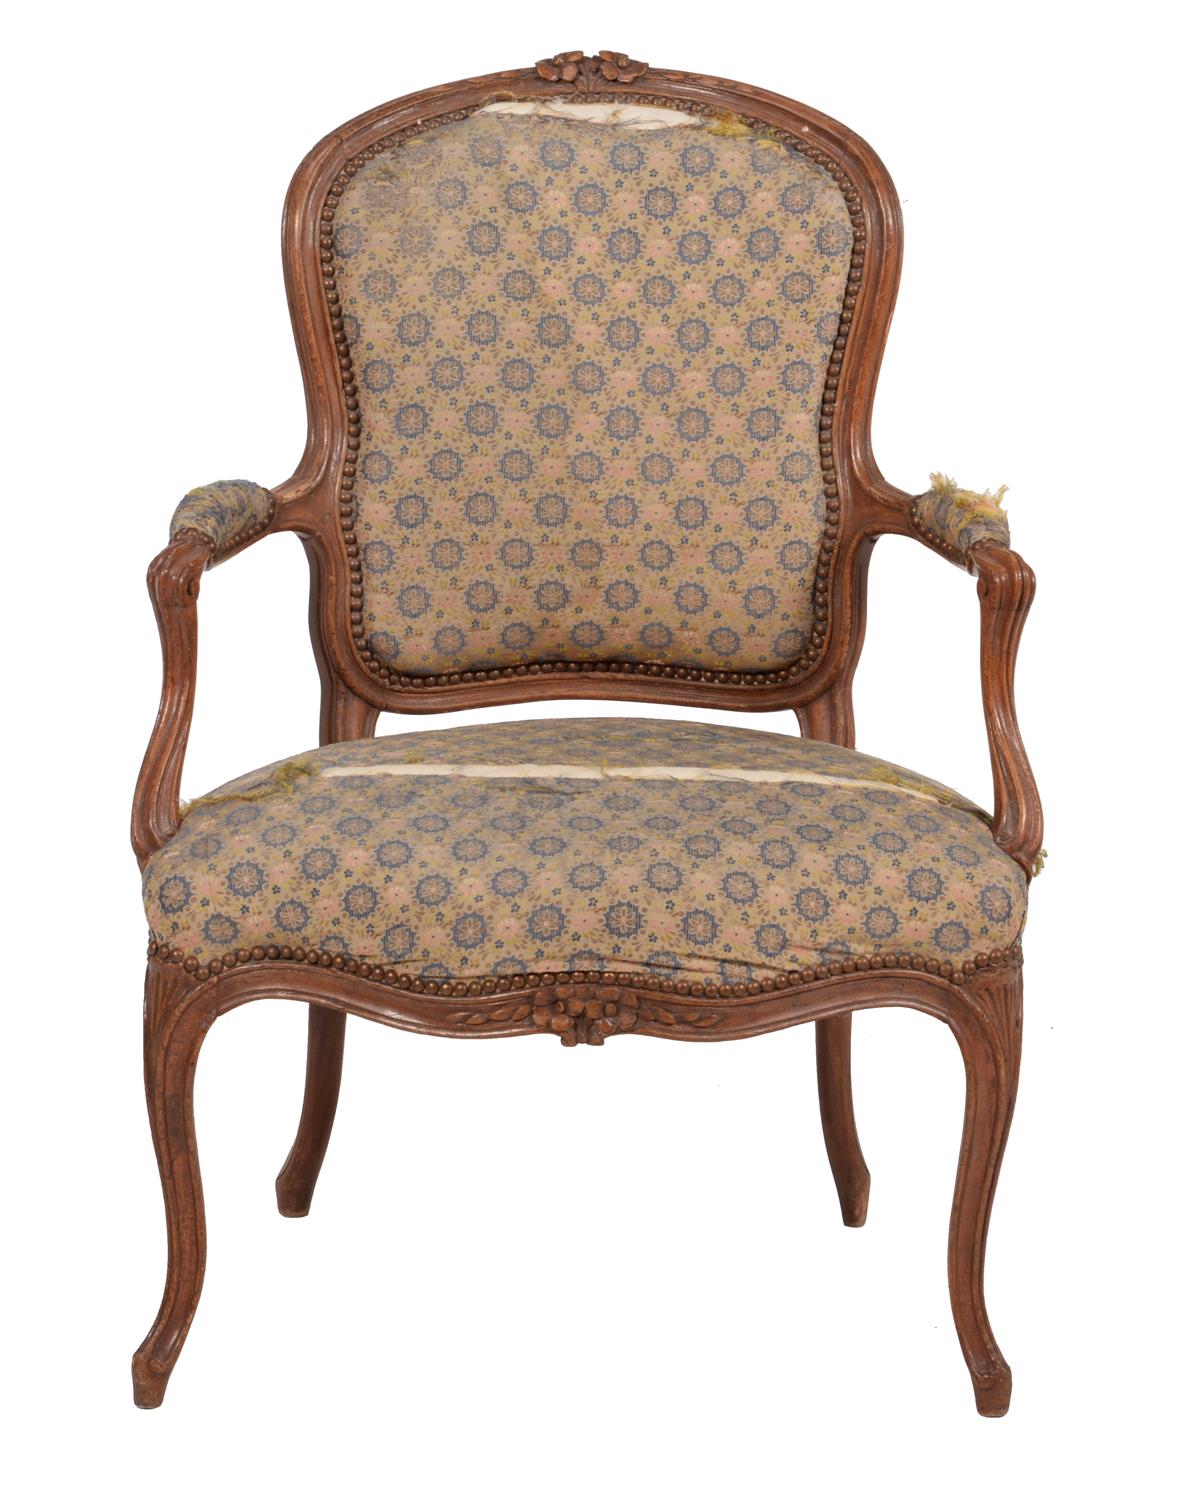 A French walnut and upholstered armchair in Louis XV style - Image 2 of 2